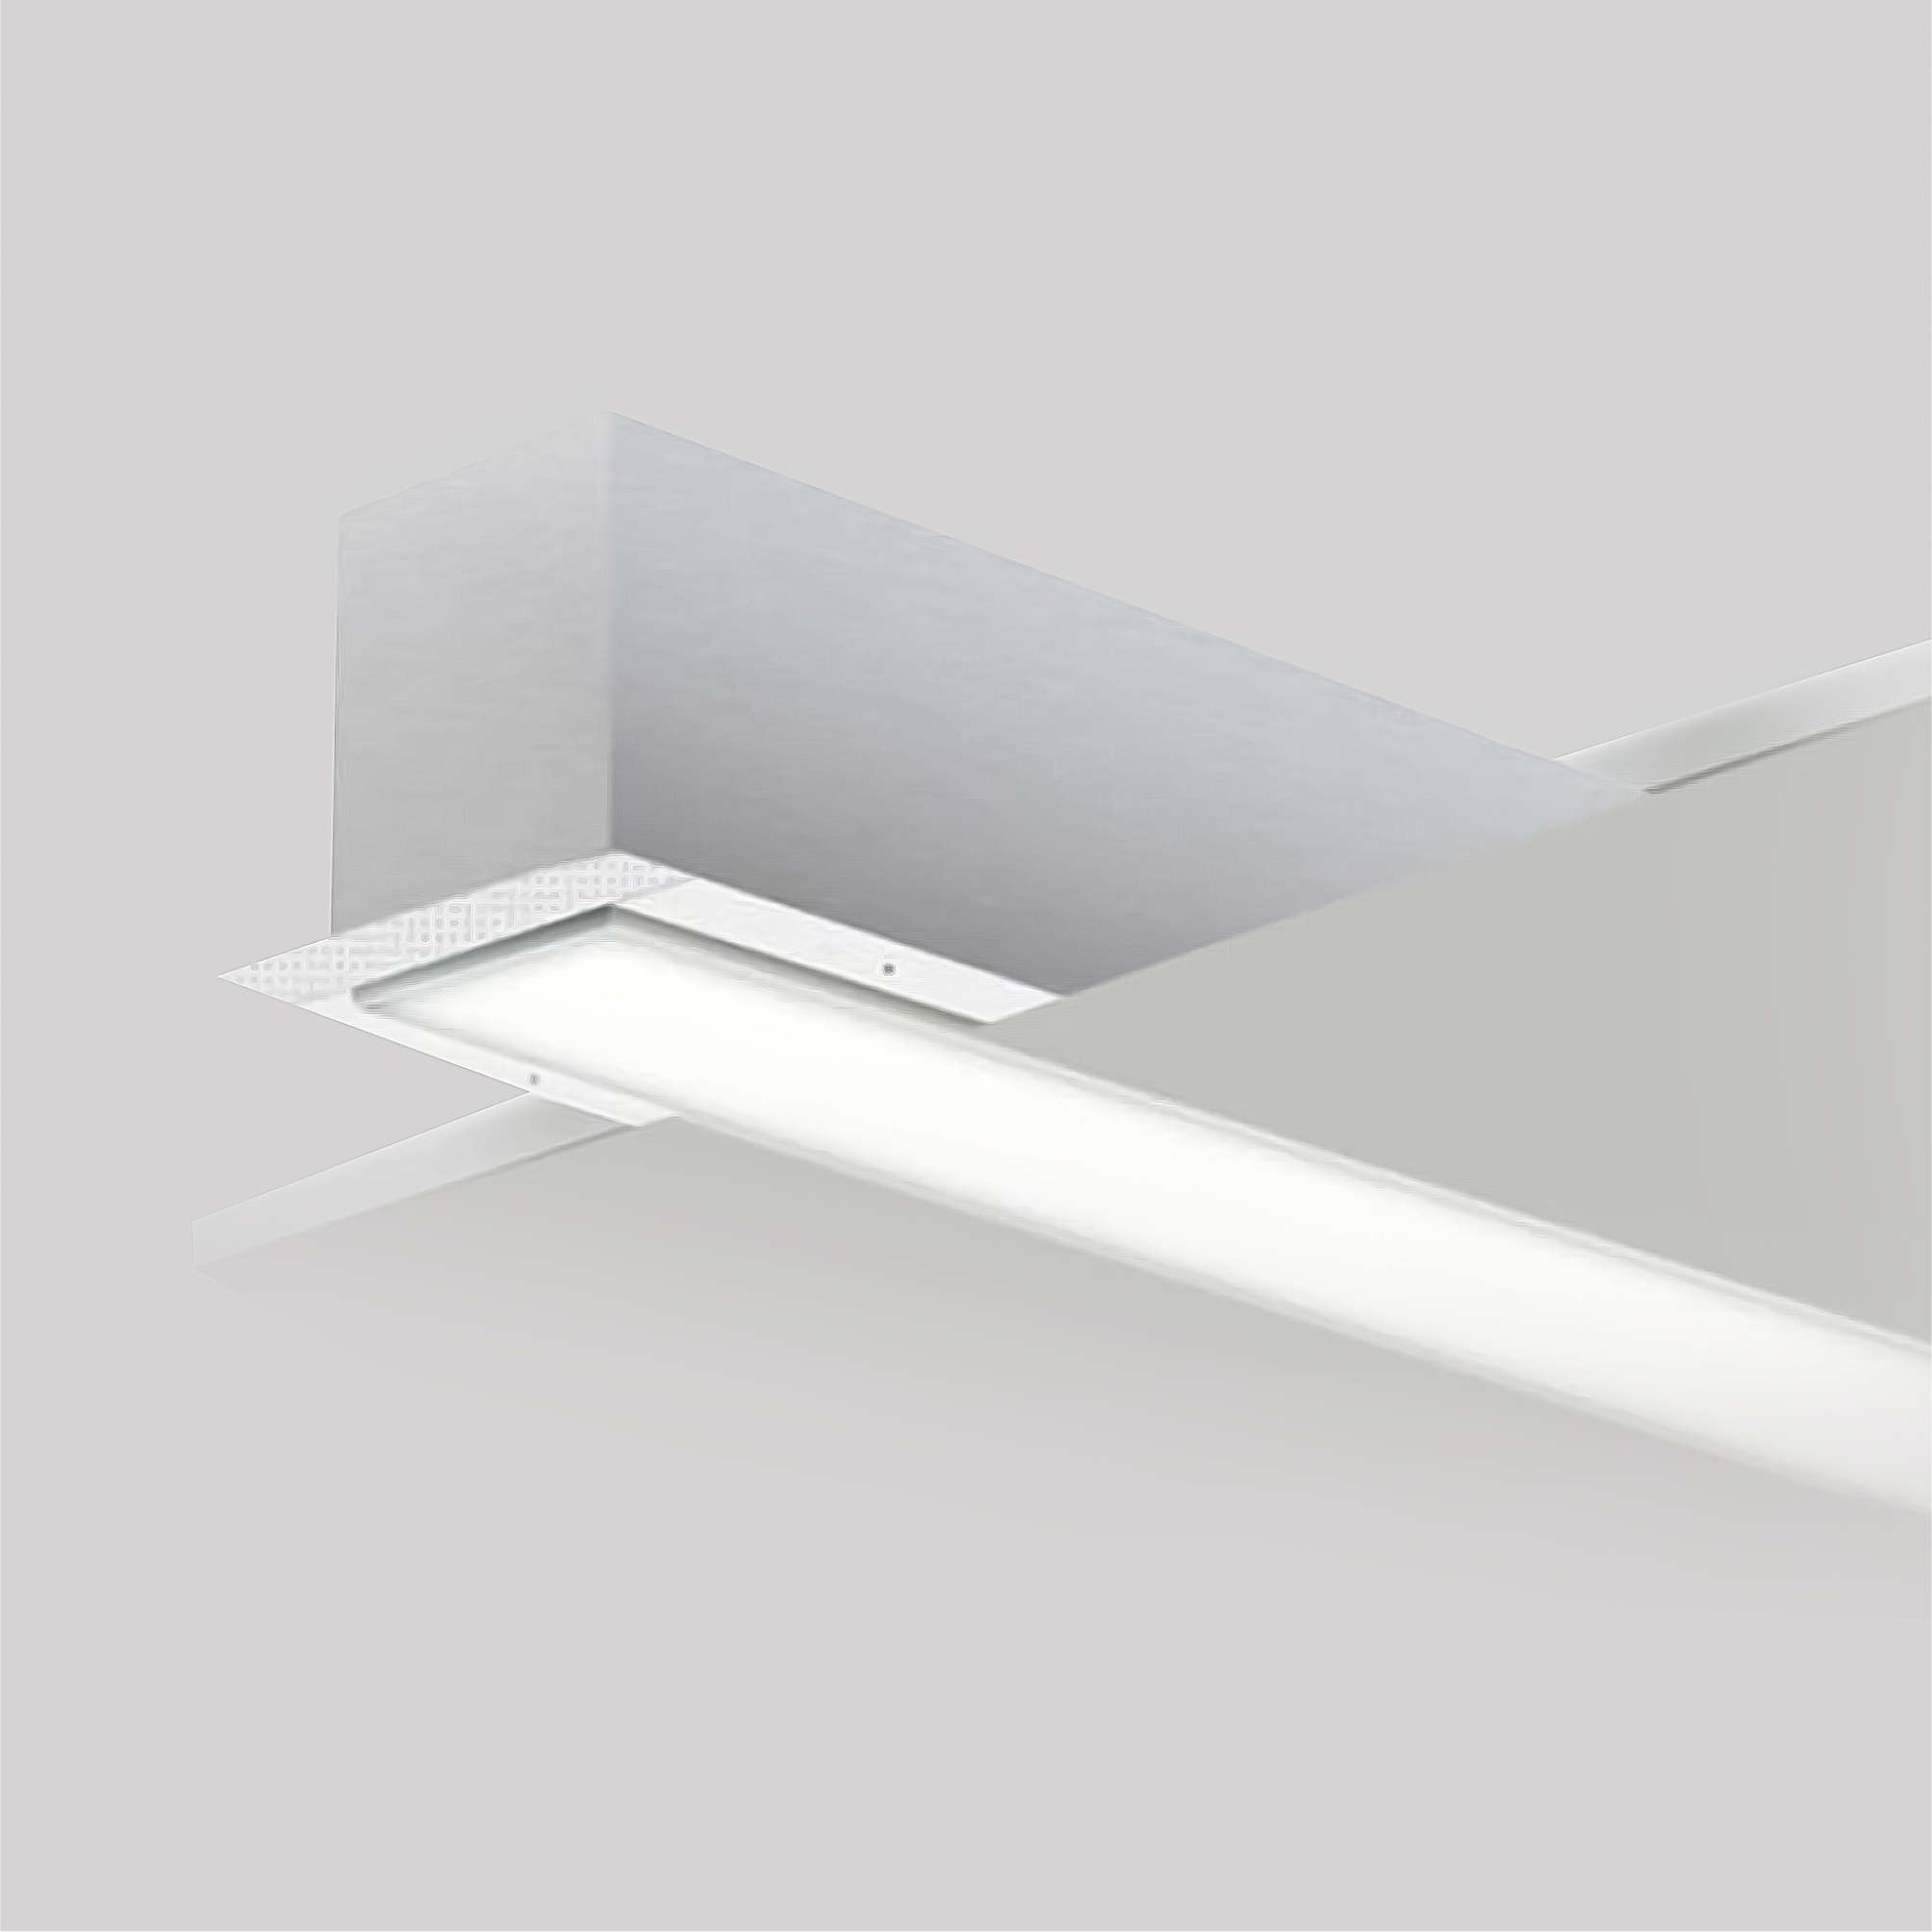 2.5-Inch Recessed Linear LED Luminaire